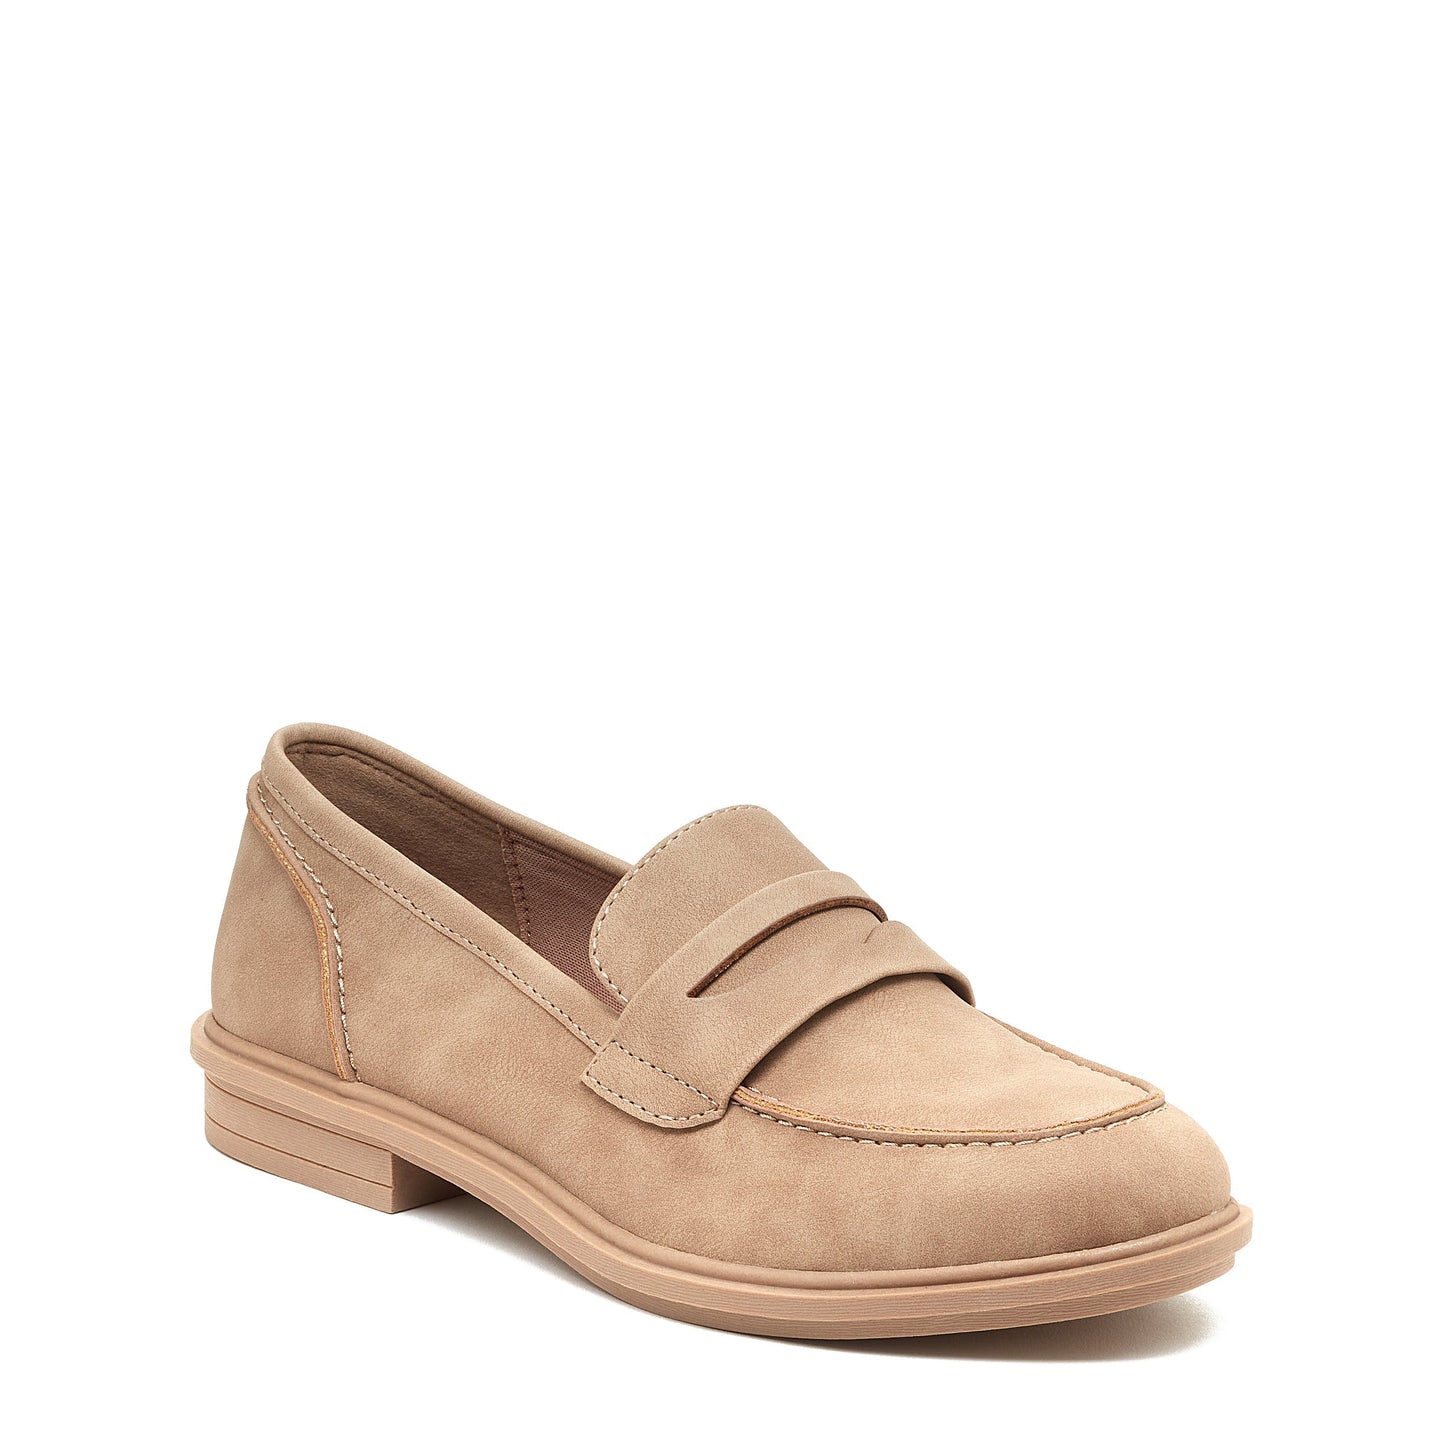 Rocket Dog® Women's Gabby Taupe Loafer